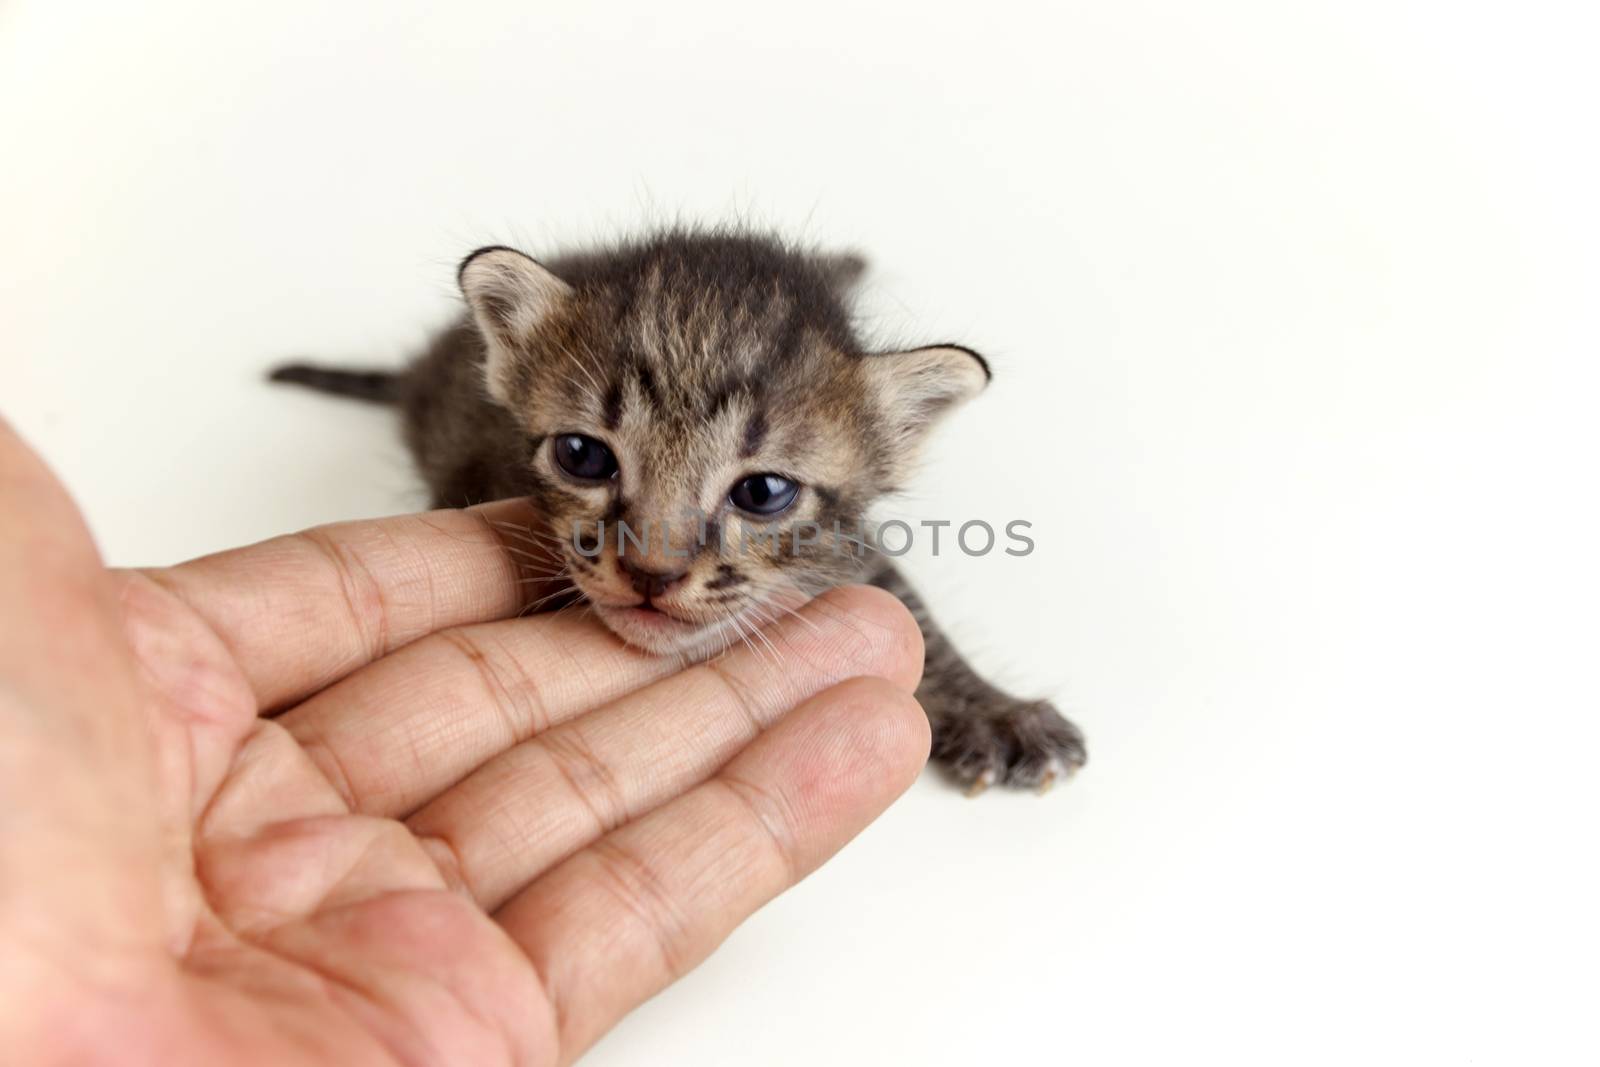 human hand gentle and brown tabby kitten by PeachLoveU